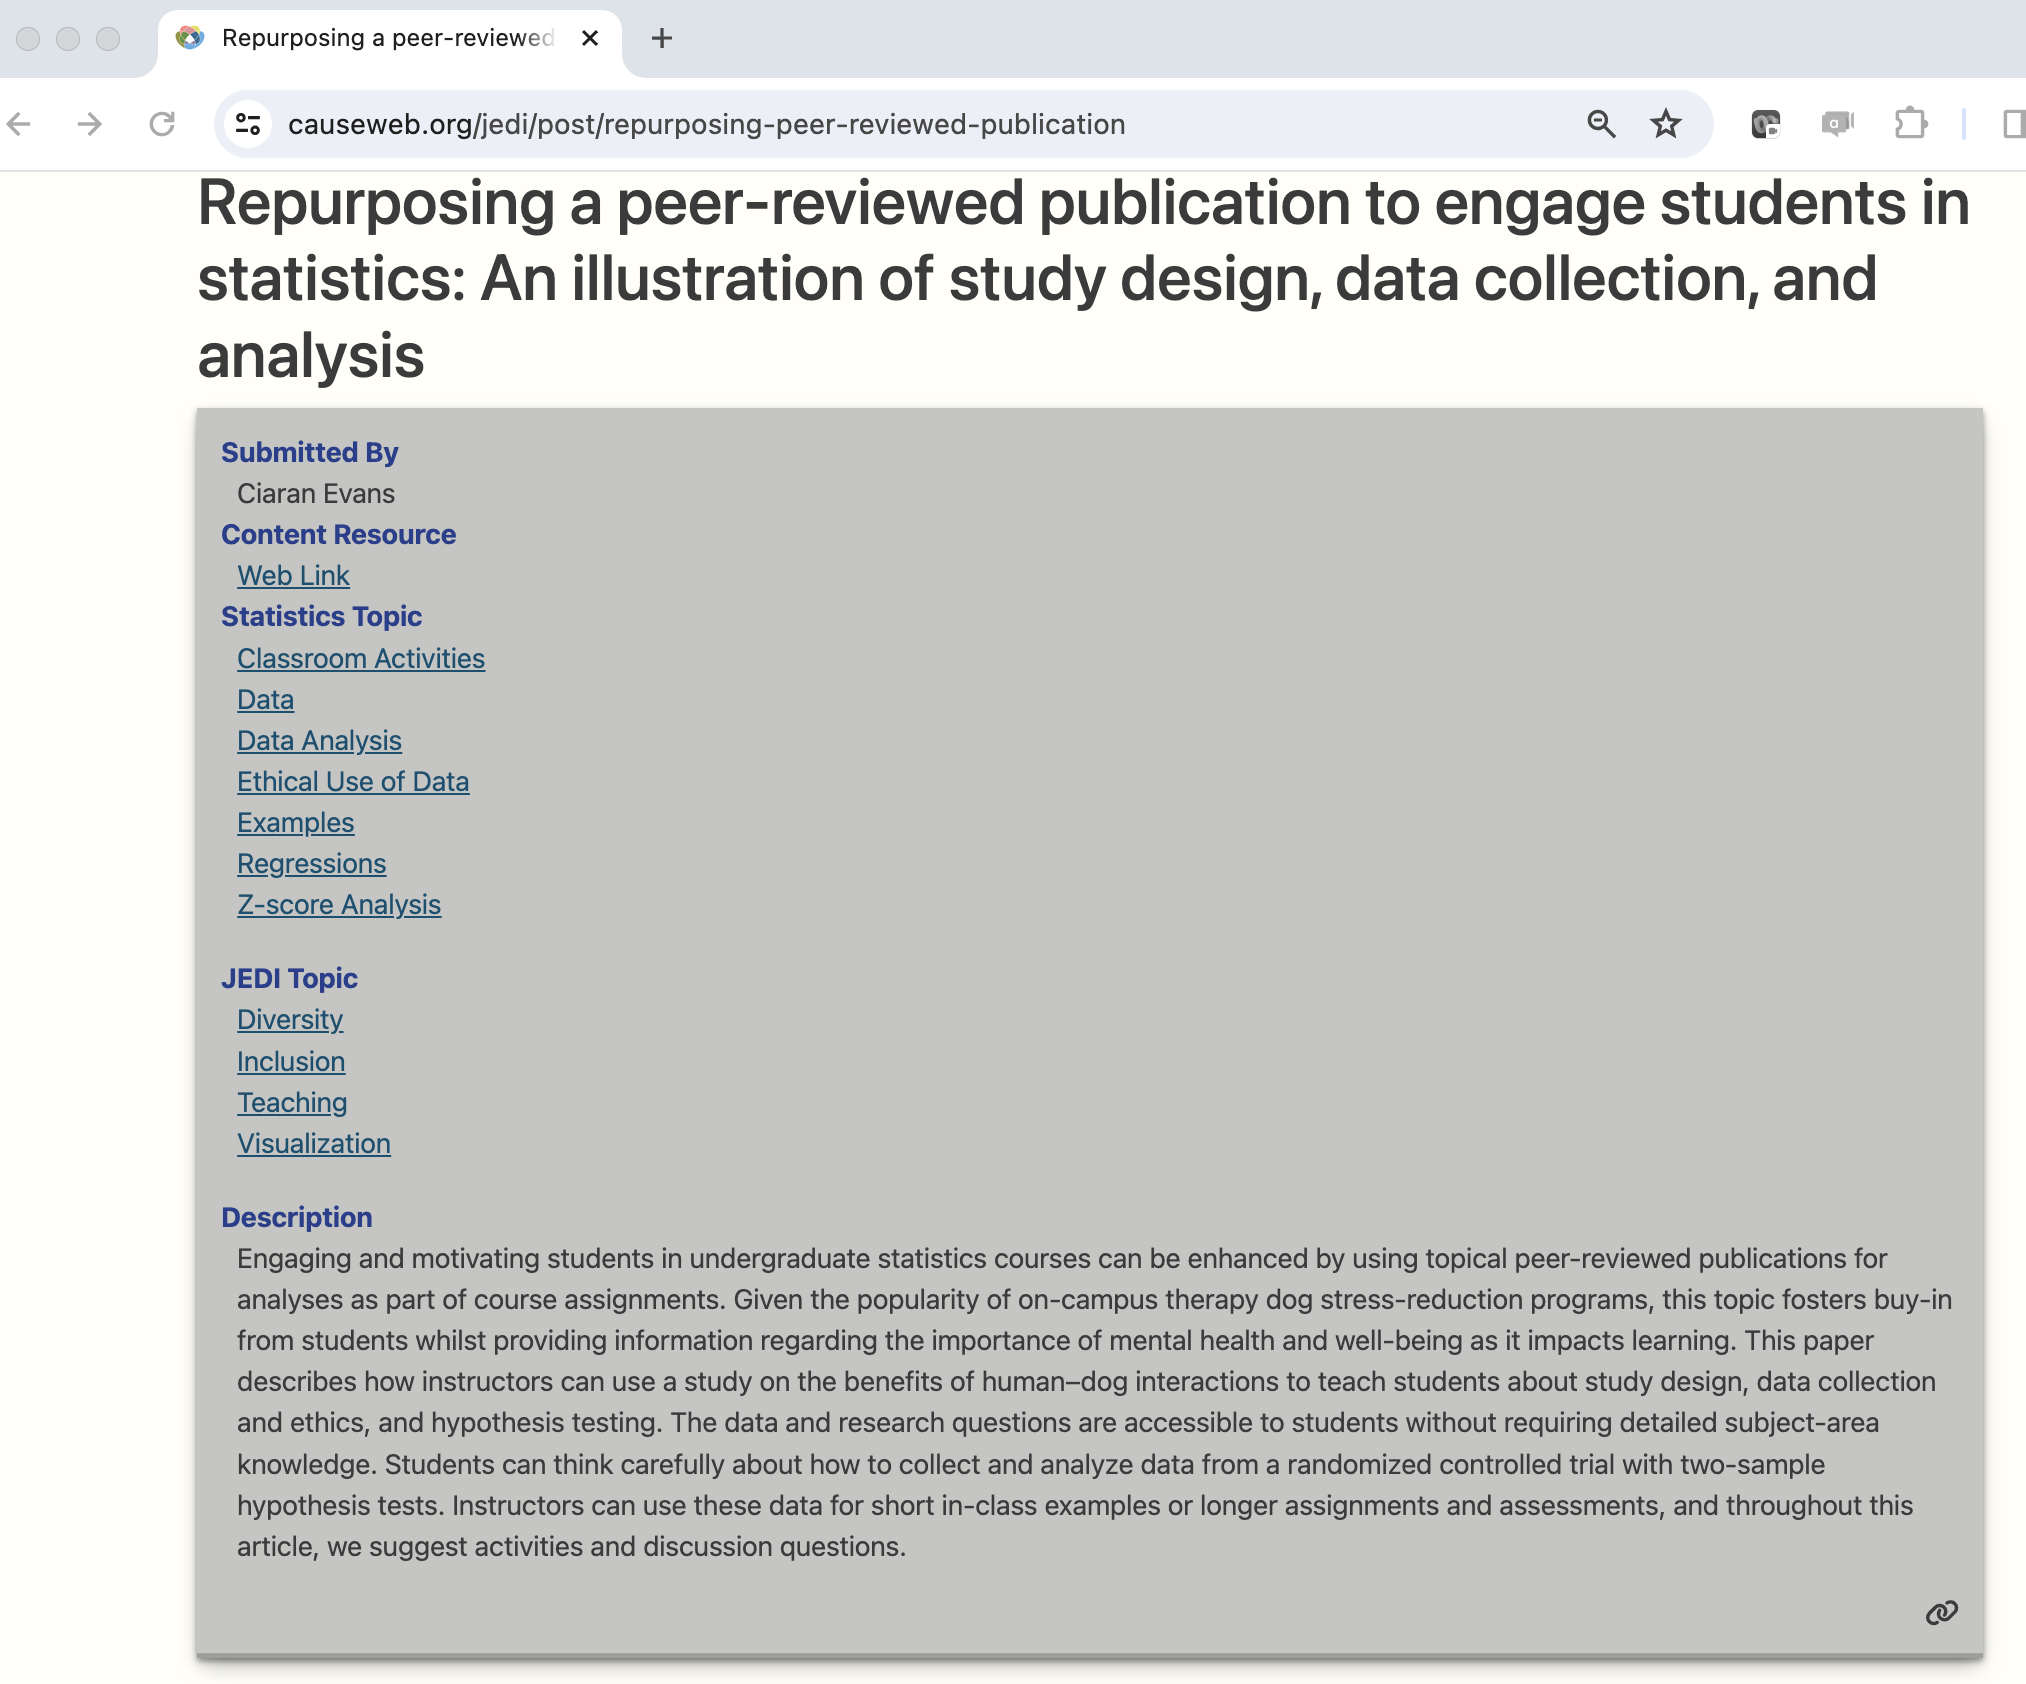 Example 2 showing the author, statistics topics, JEDI topics, and description of the resource.